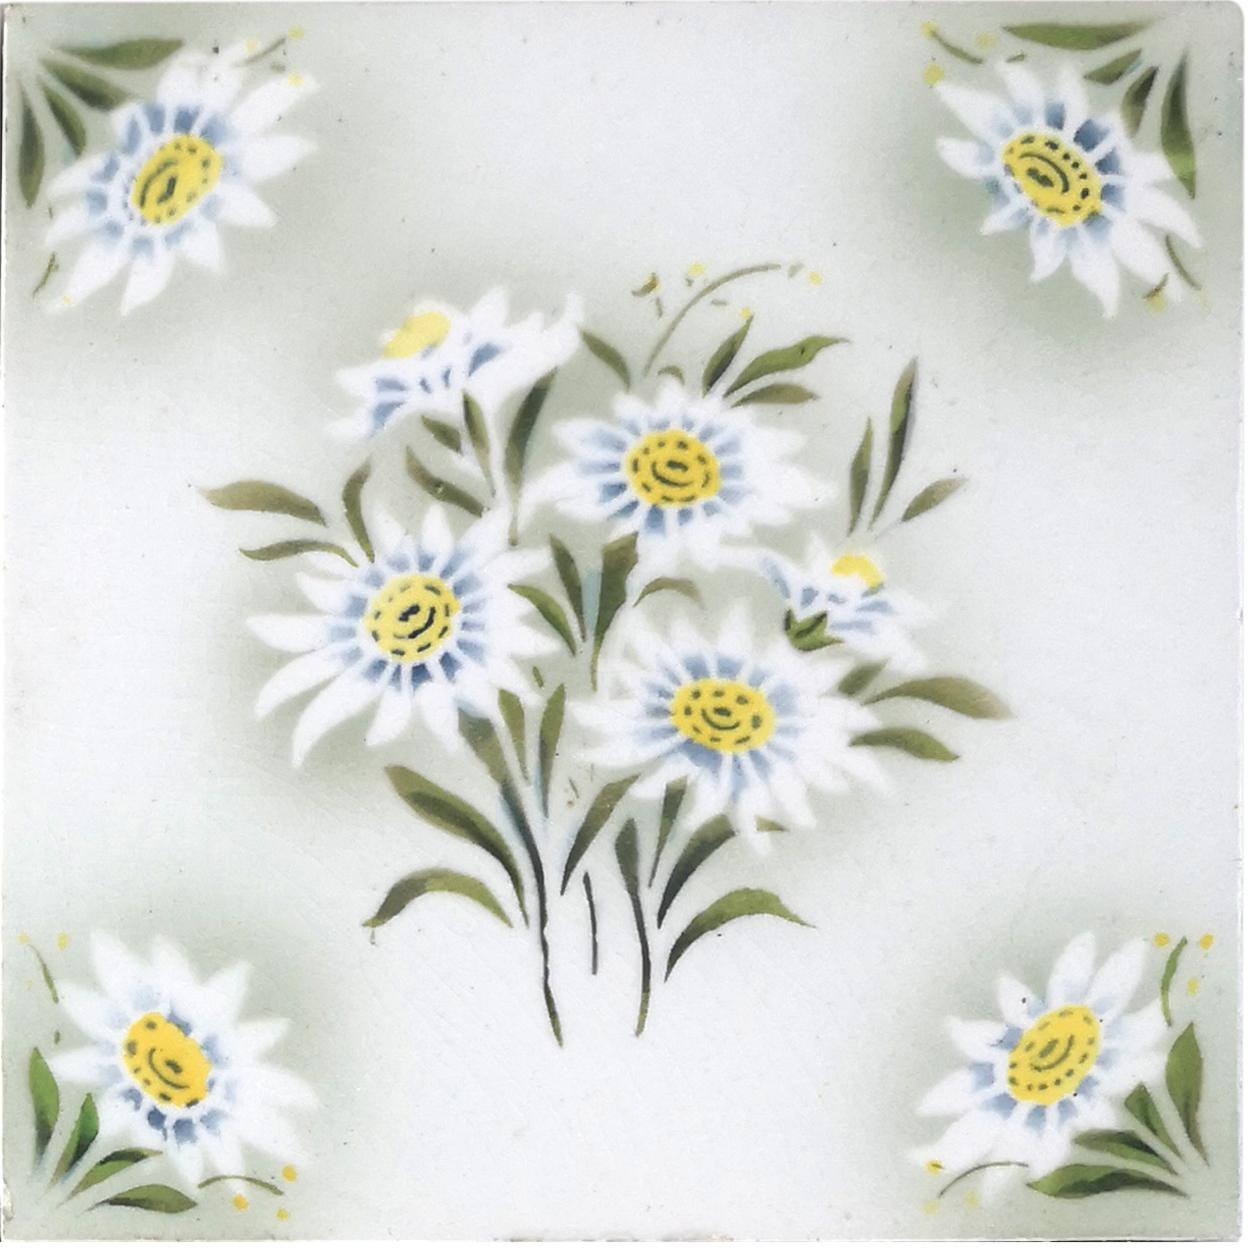 1 of the 100 amazing and unique handmade ceramic tiles. Manufactured by Societe Morialme, circa 1920s. Stylized design in wonderful soft colors (dark) green, ochre, yellow, light blue/gray. These tiles would be charming displayed on easels, framed